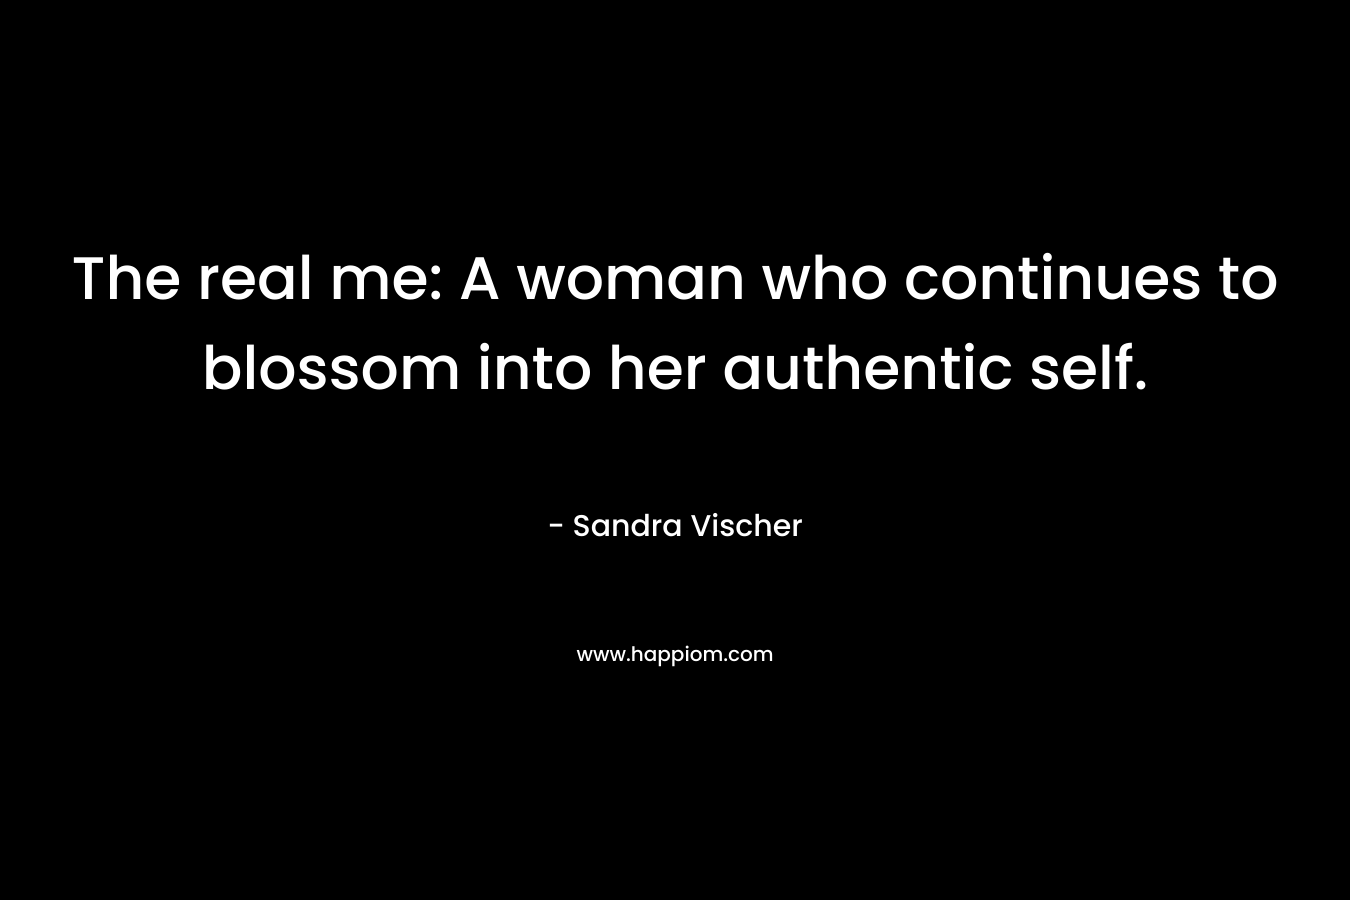 The real me: A woman who continues to blossom into her authentic self. – Sandra Vischer